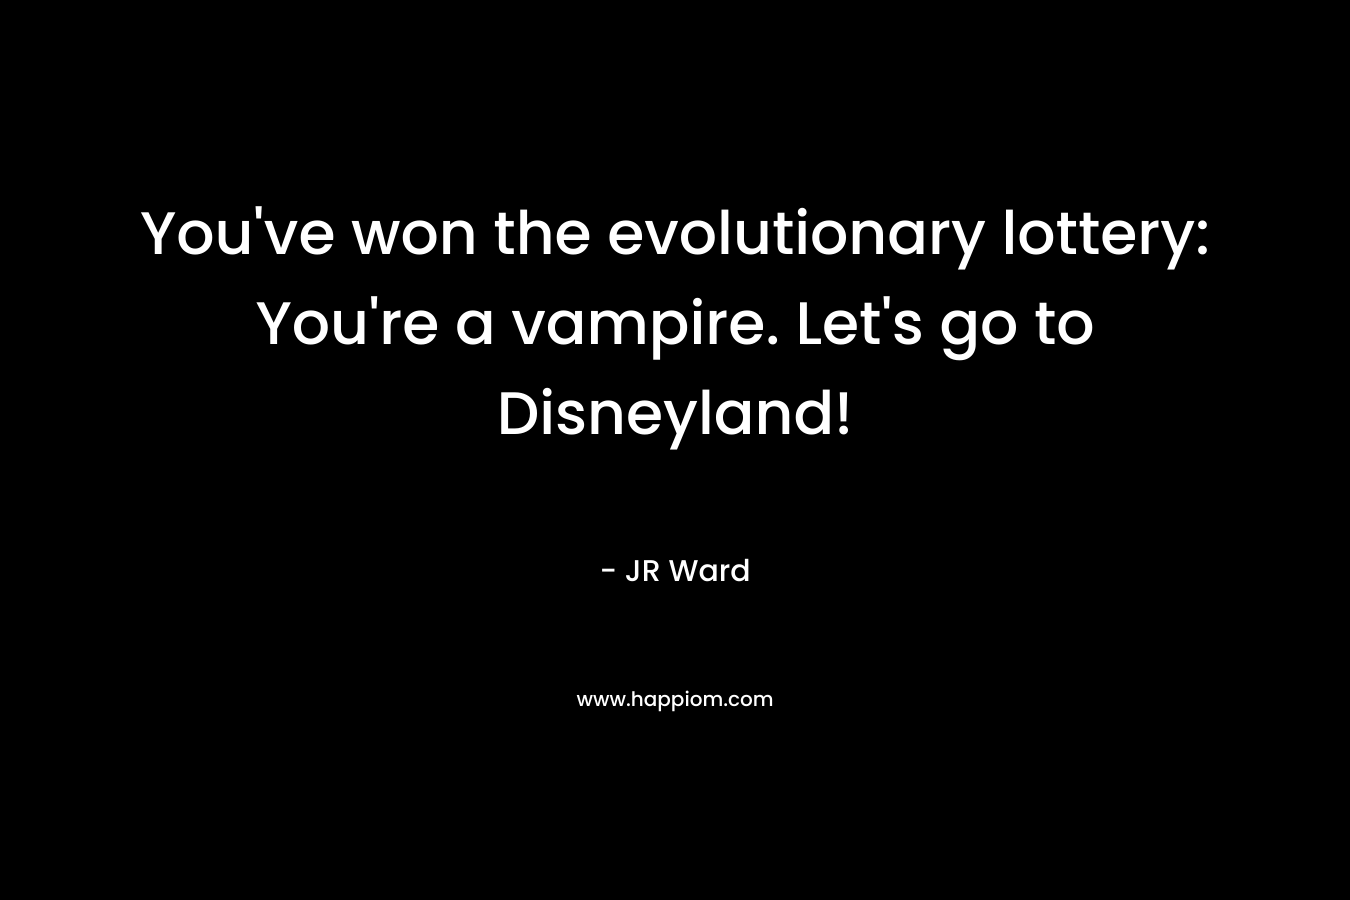 You’ve won the evolutionary lottery: You’re a vampire. Let’s go to Disneyland! – JR Ward